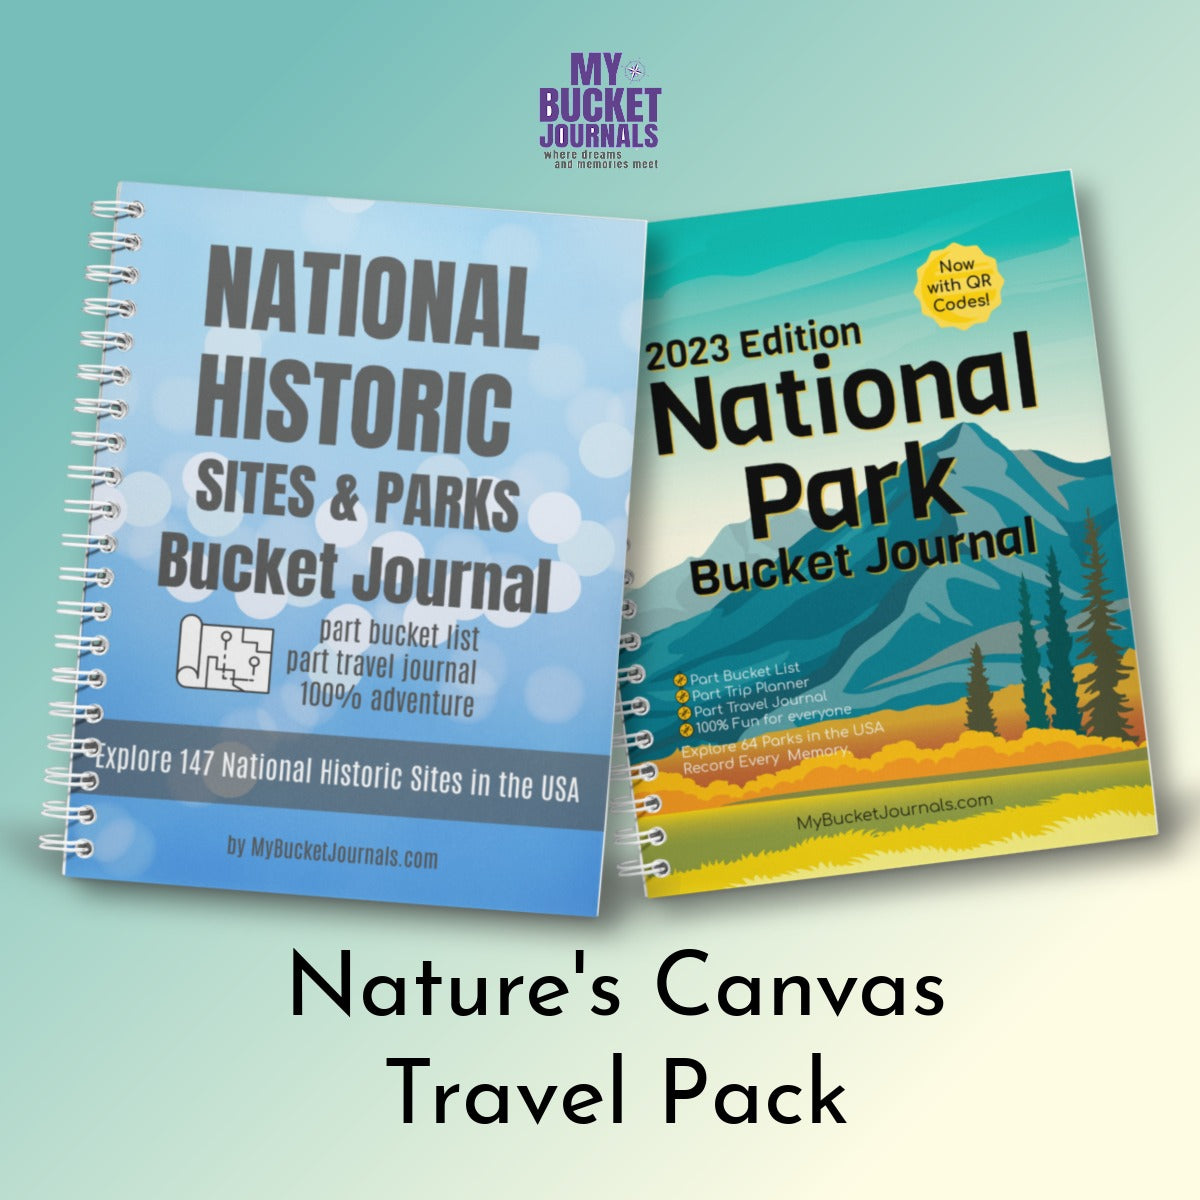 Nature’s Canvas Travel Pack